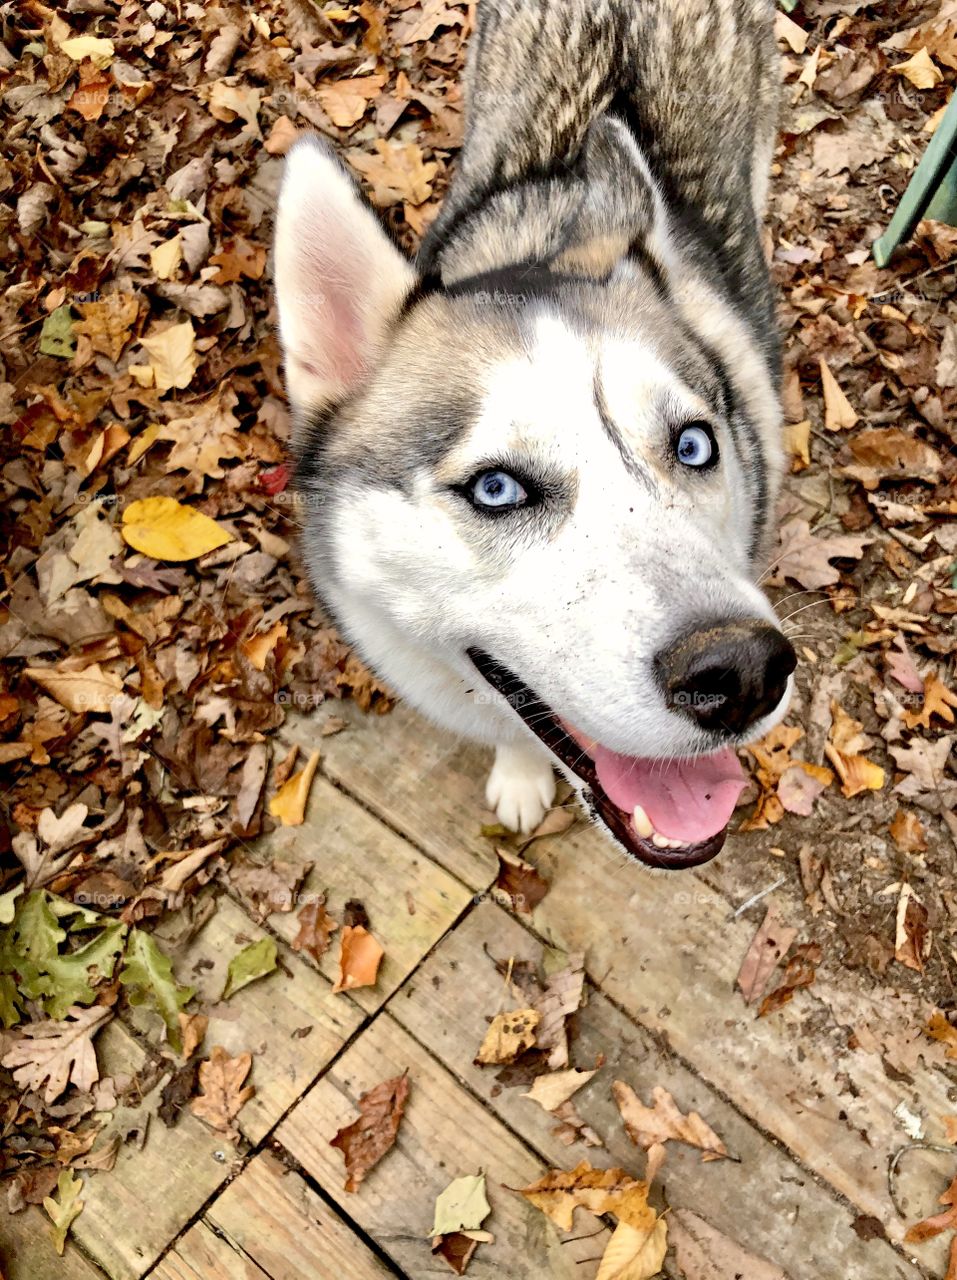 Pretty husky dog with goofy smile and dirt on nose standing in fallen autumn leaves 